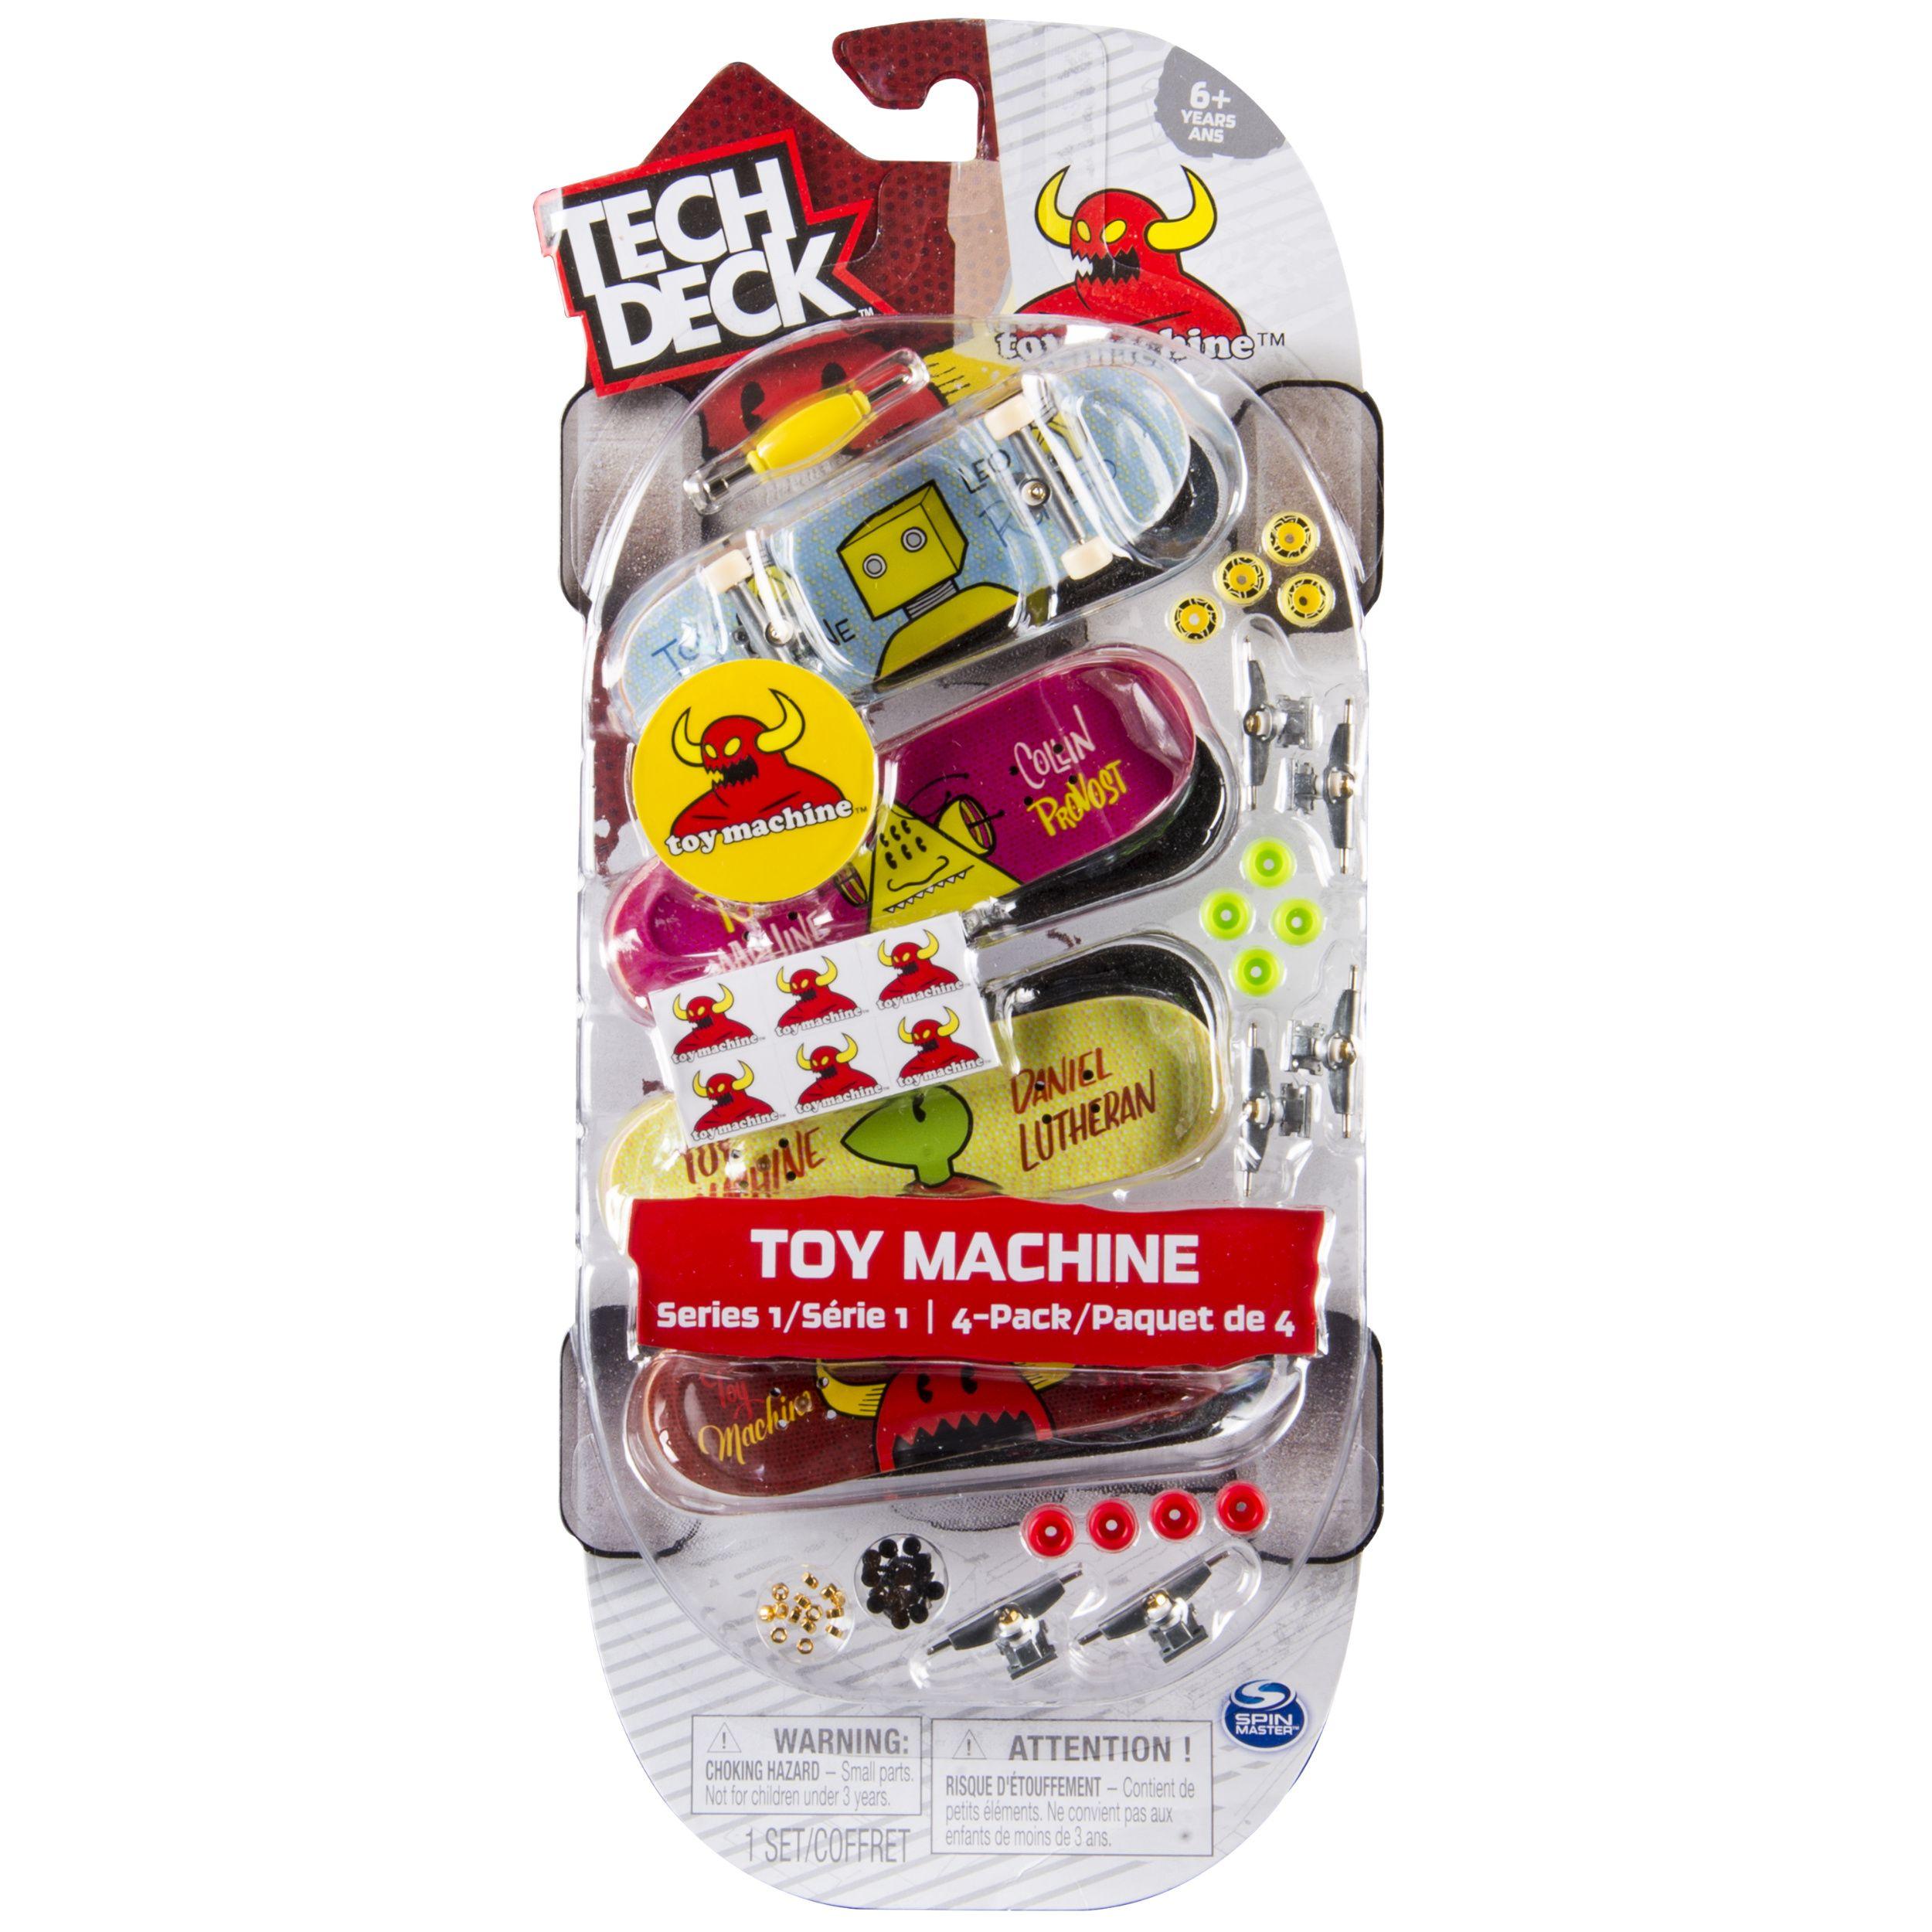 Small Toy Machine Logo - Tech Deck 96mm Fingerboards - 4-Pack - Toy Machine